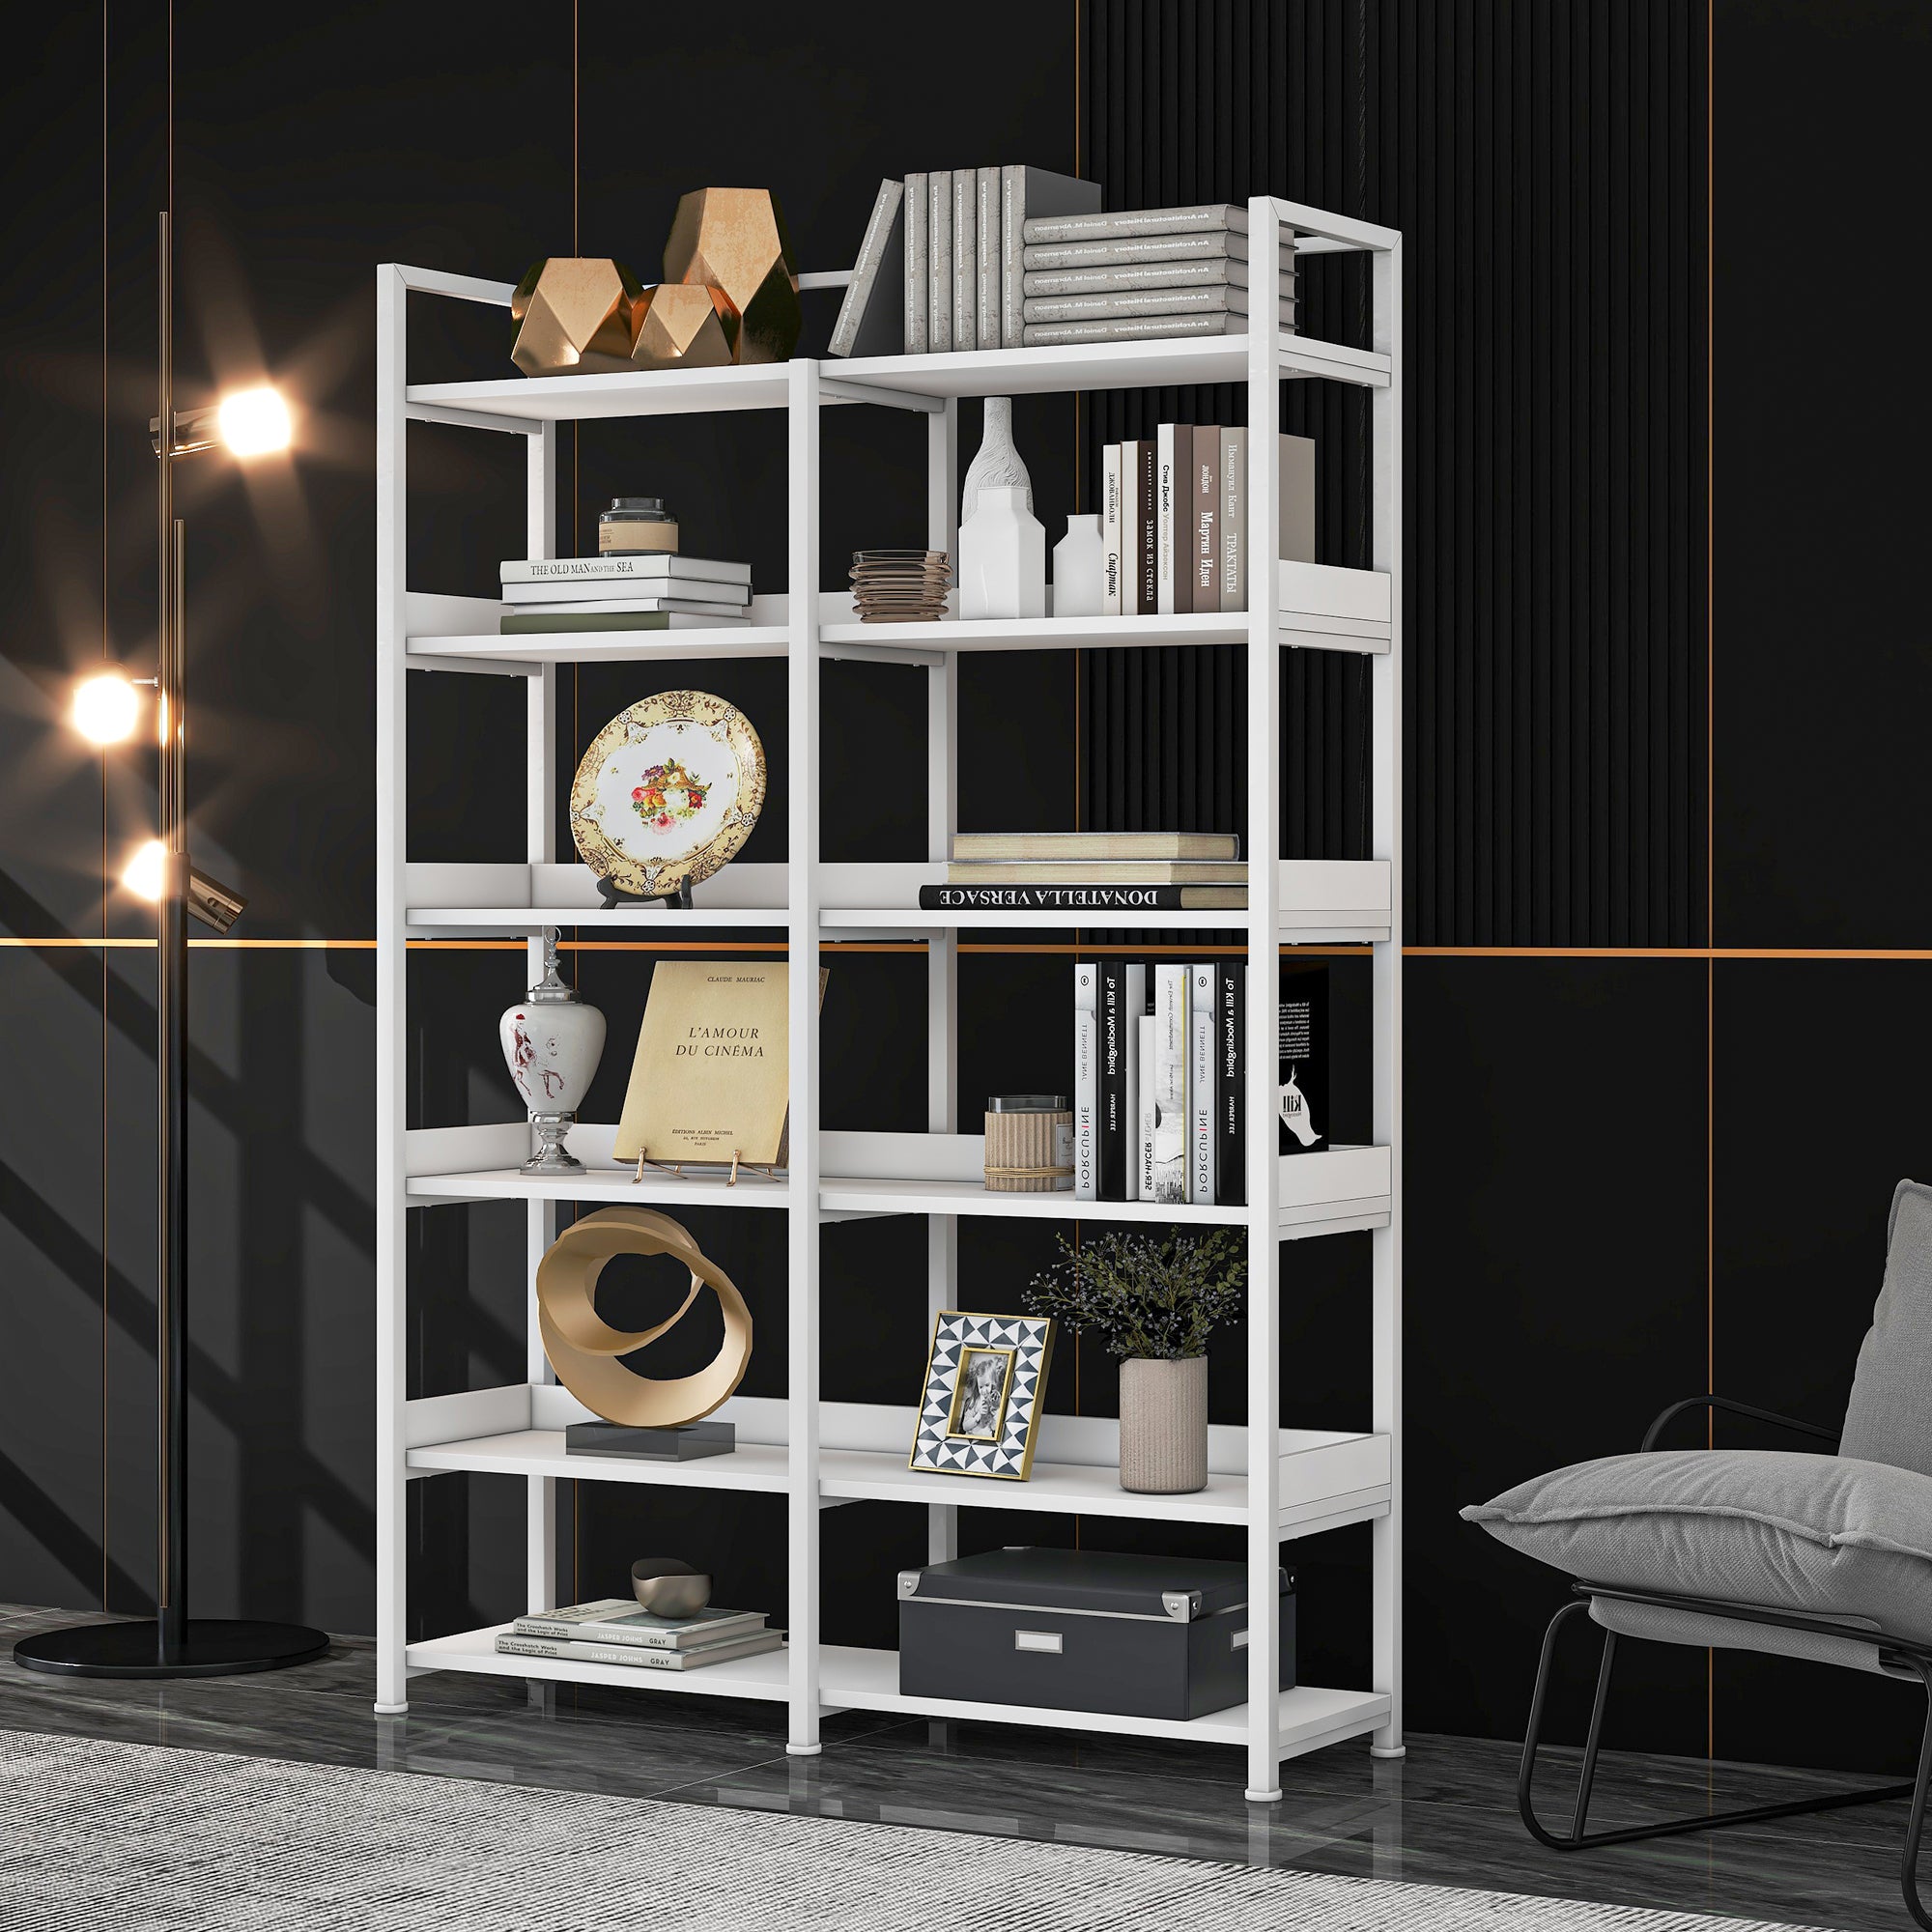 🆓🚛 70.8" Tall Bookshelf, Stainless Steel Frame, 6-Tier Shelves With Back & Side Panel, Adjustable Foot Pads, White